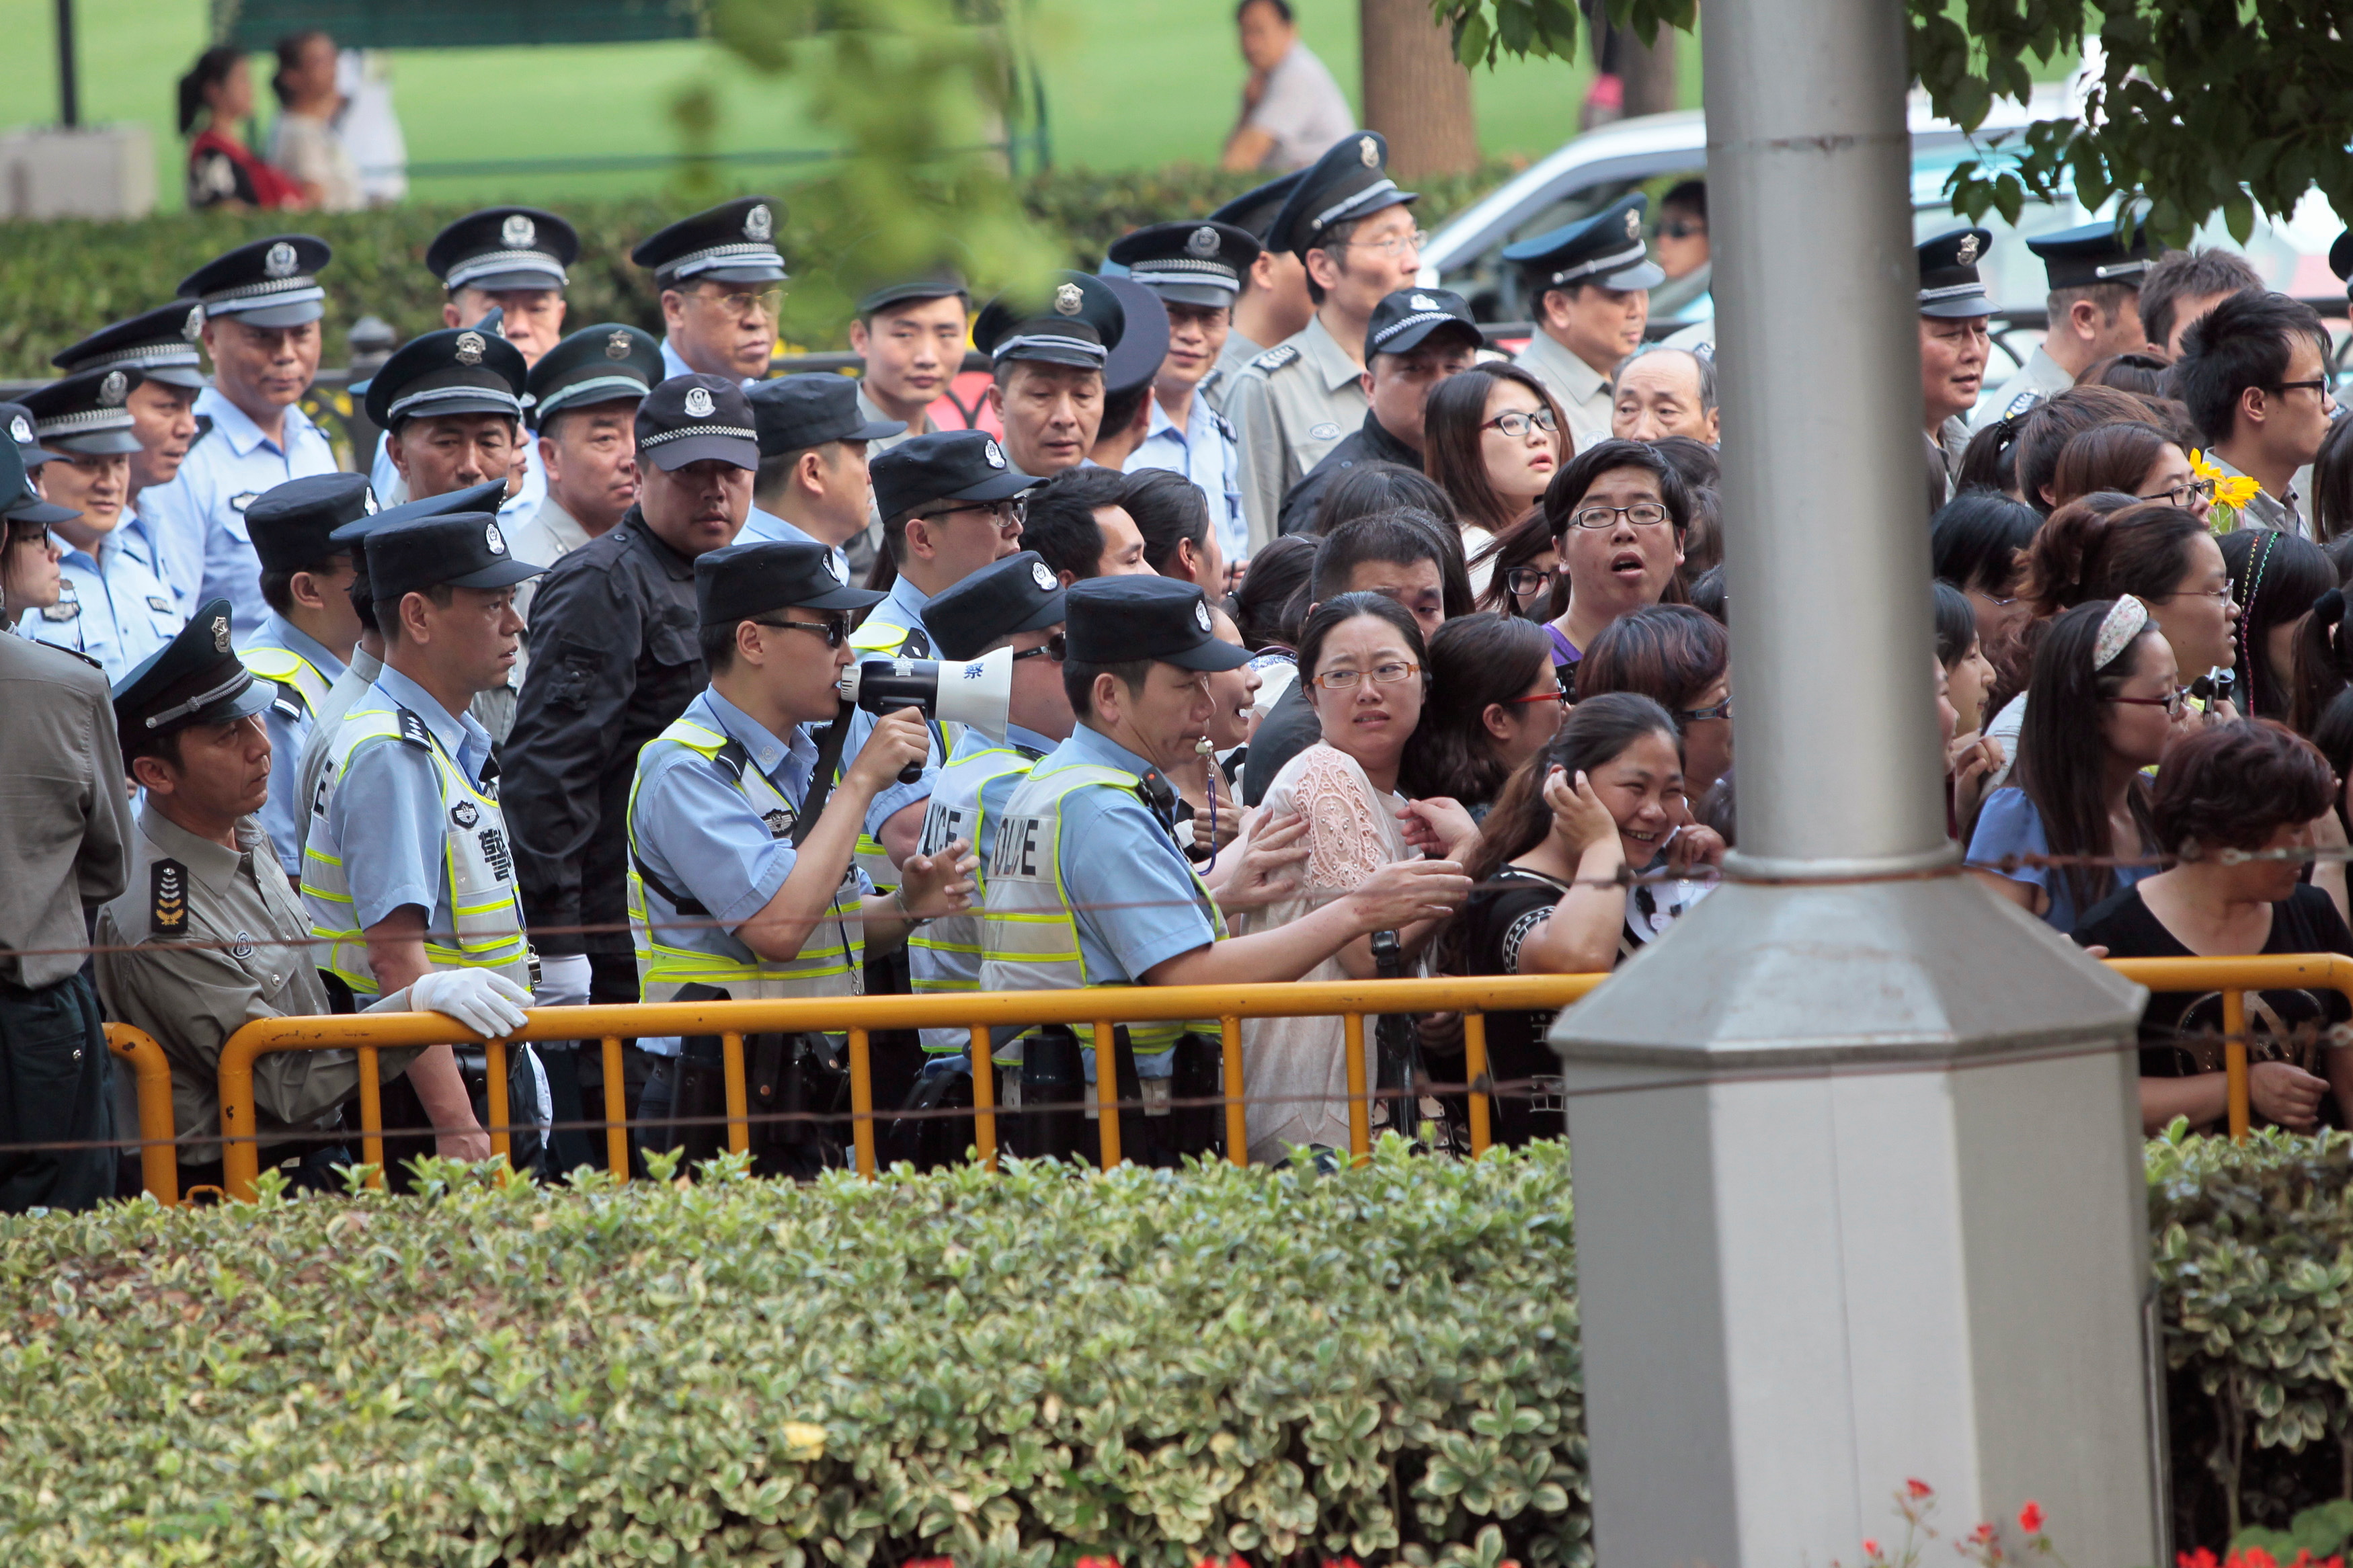 Police officers remove fans standing outside the opening ceremony of the 17th Shanghai International Film Festival